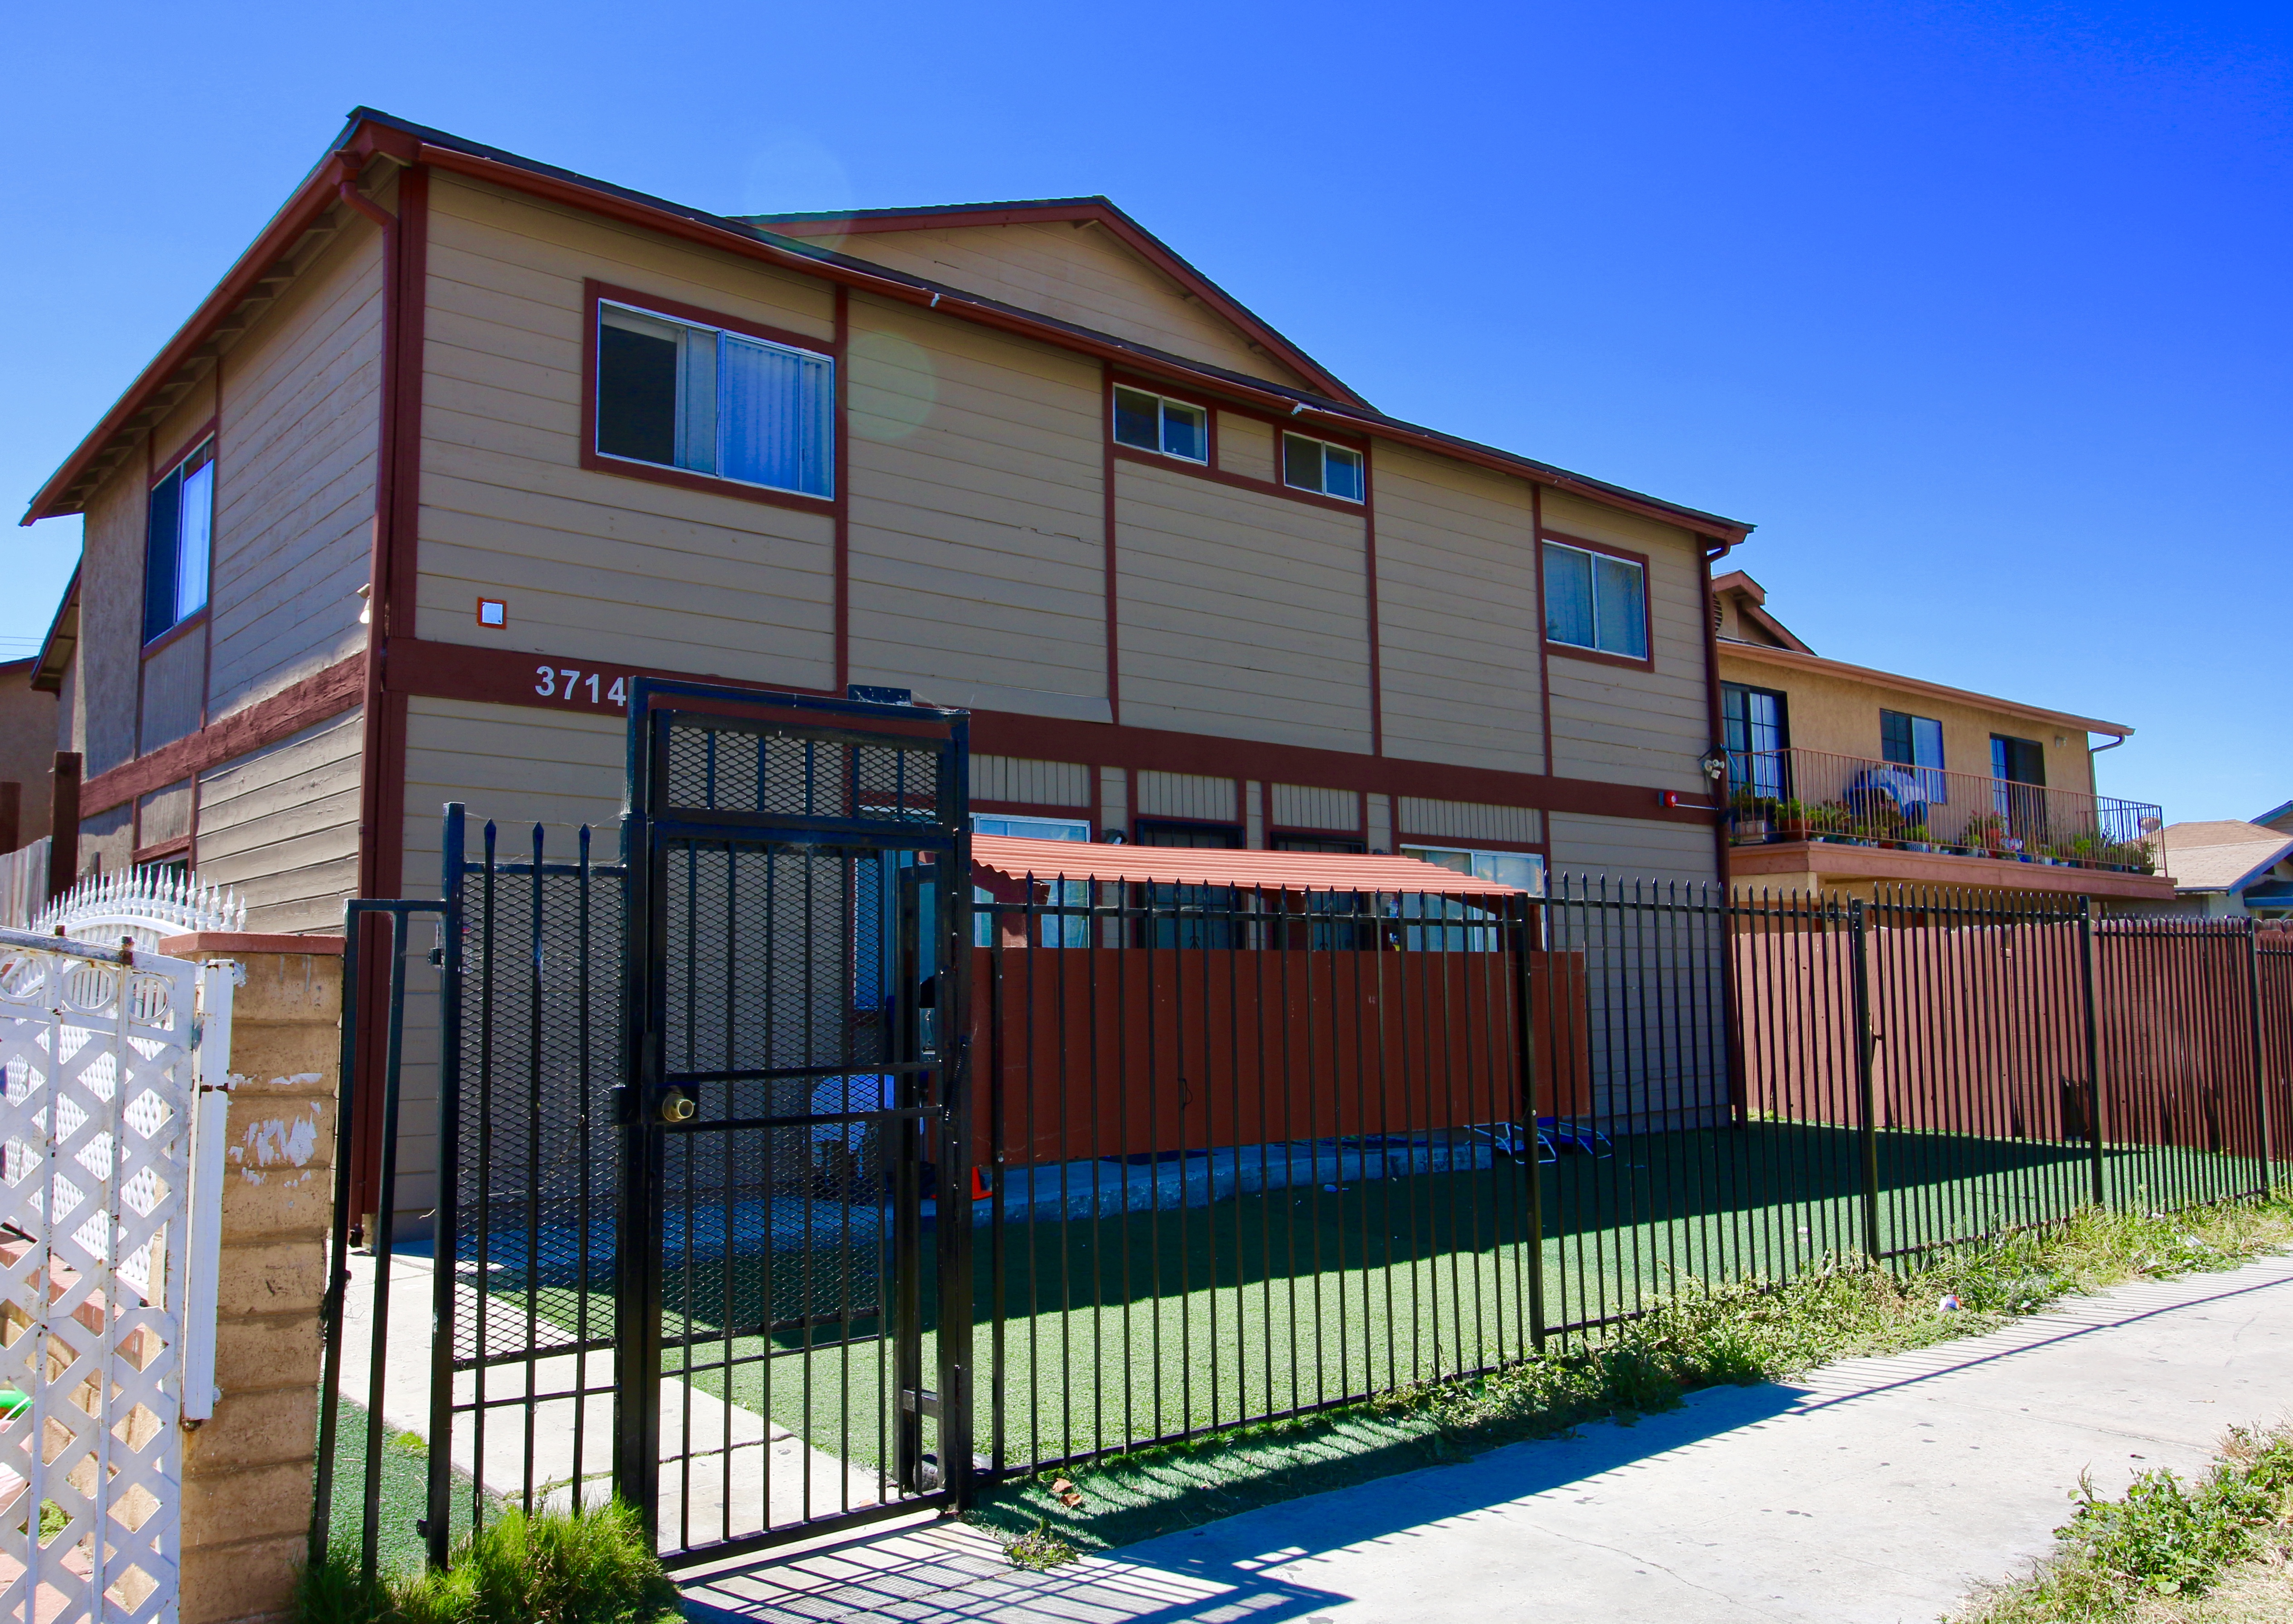 City Heights Apartments Sold For $2.6M | San Diego Business Journal